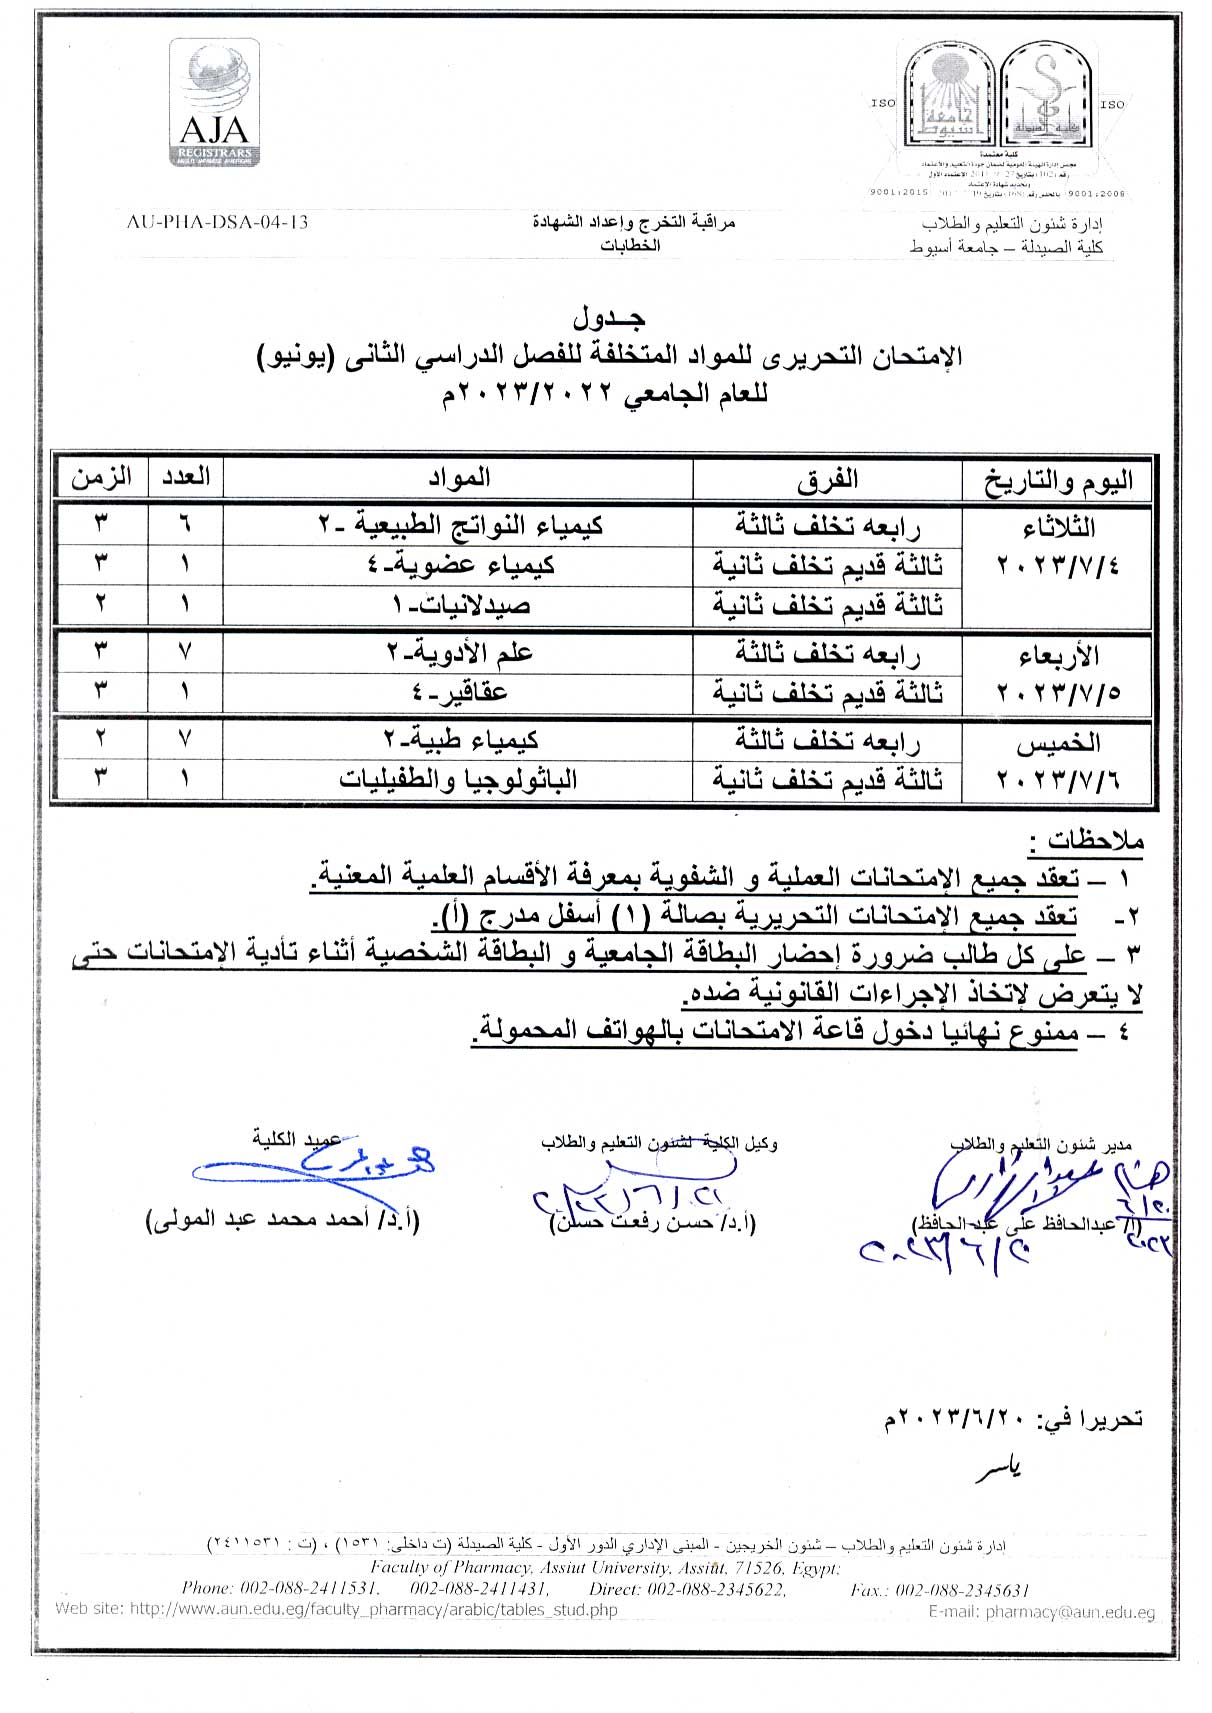 (Amendment)Schedule for Exams of the second semester (June) of the academic year 2022/2023 